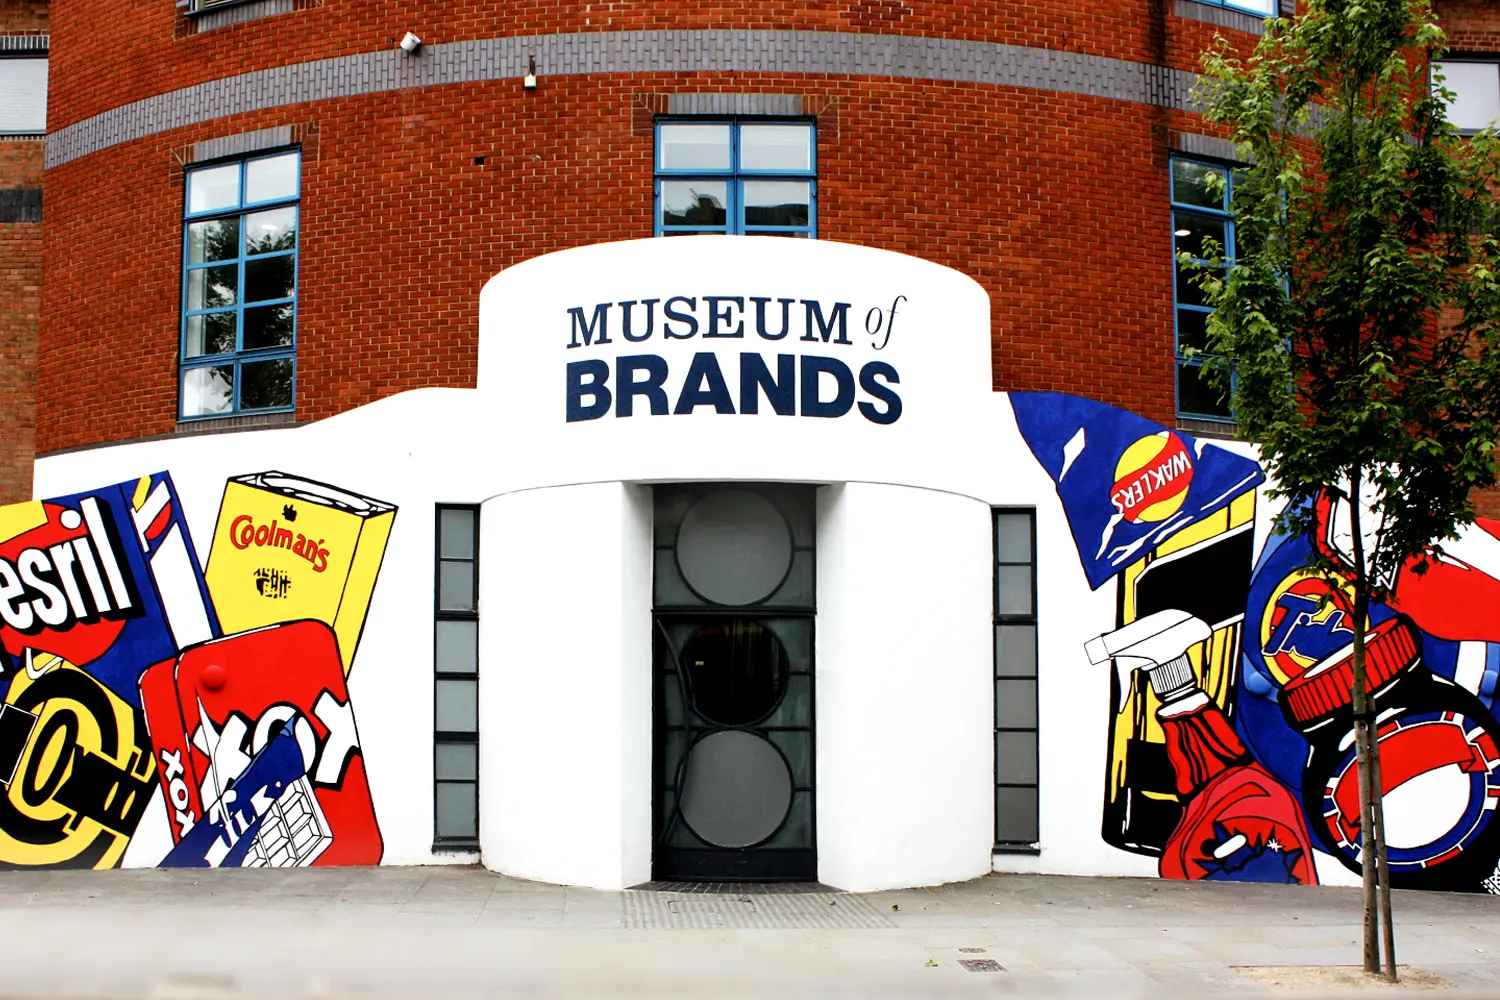 Entrance to the Museum of Brands in London, UK